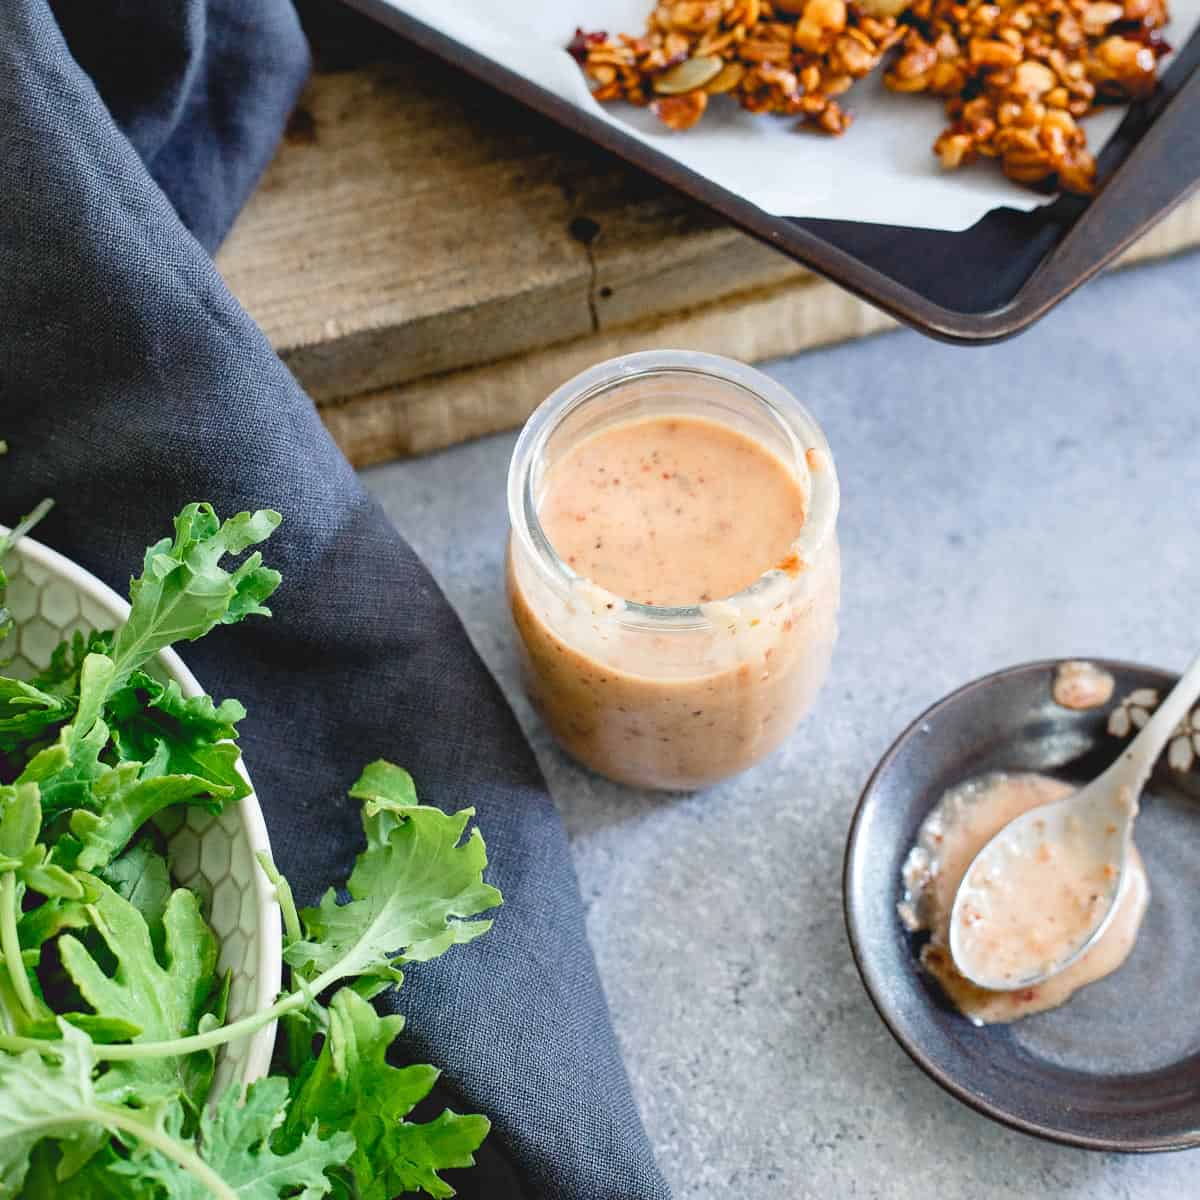 Tart cherries and dijon mustard combine in this easy homemade dressing to liven up this bay scallop baby kale corn salad.